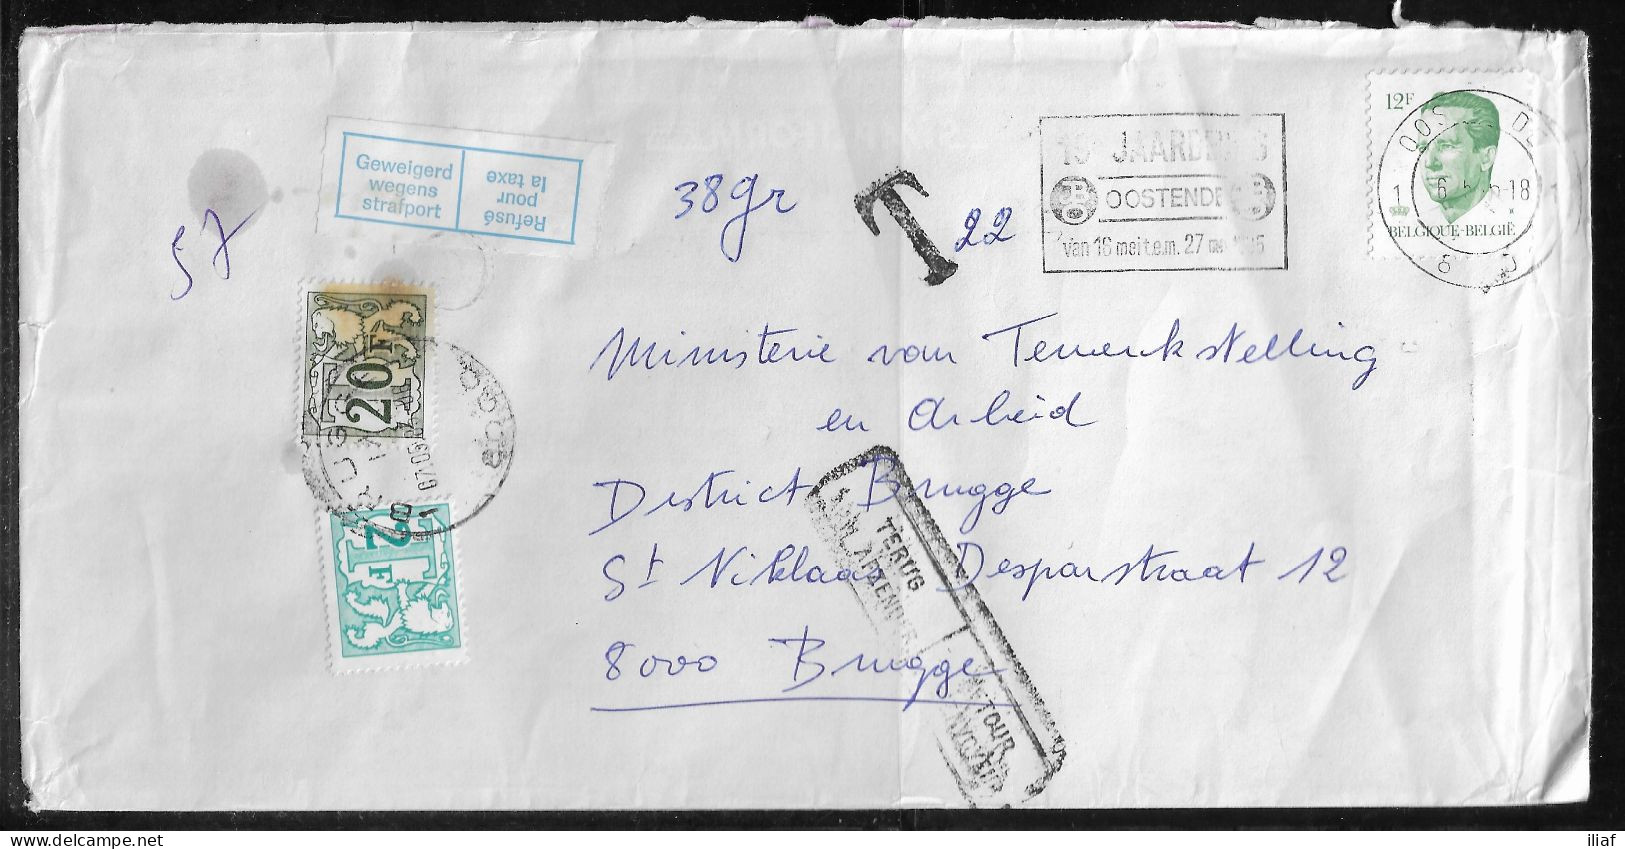 Belgium. Stamps Sc. 1091, J63, J78 On Commercial Letter, Taxed - Postage Due Stamps, Sent From Oostende On 6.05.1985 - Briefe U. Dokumente